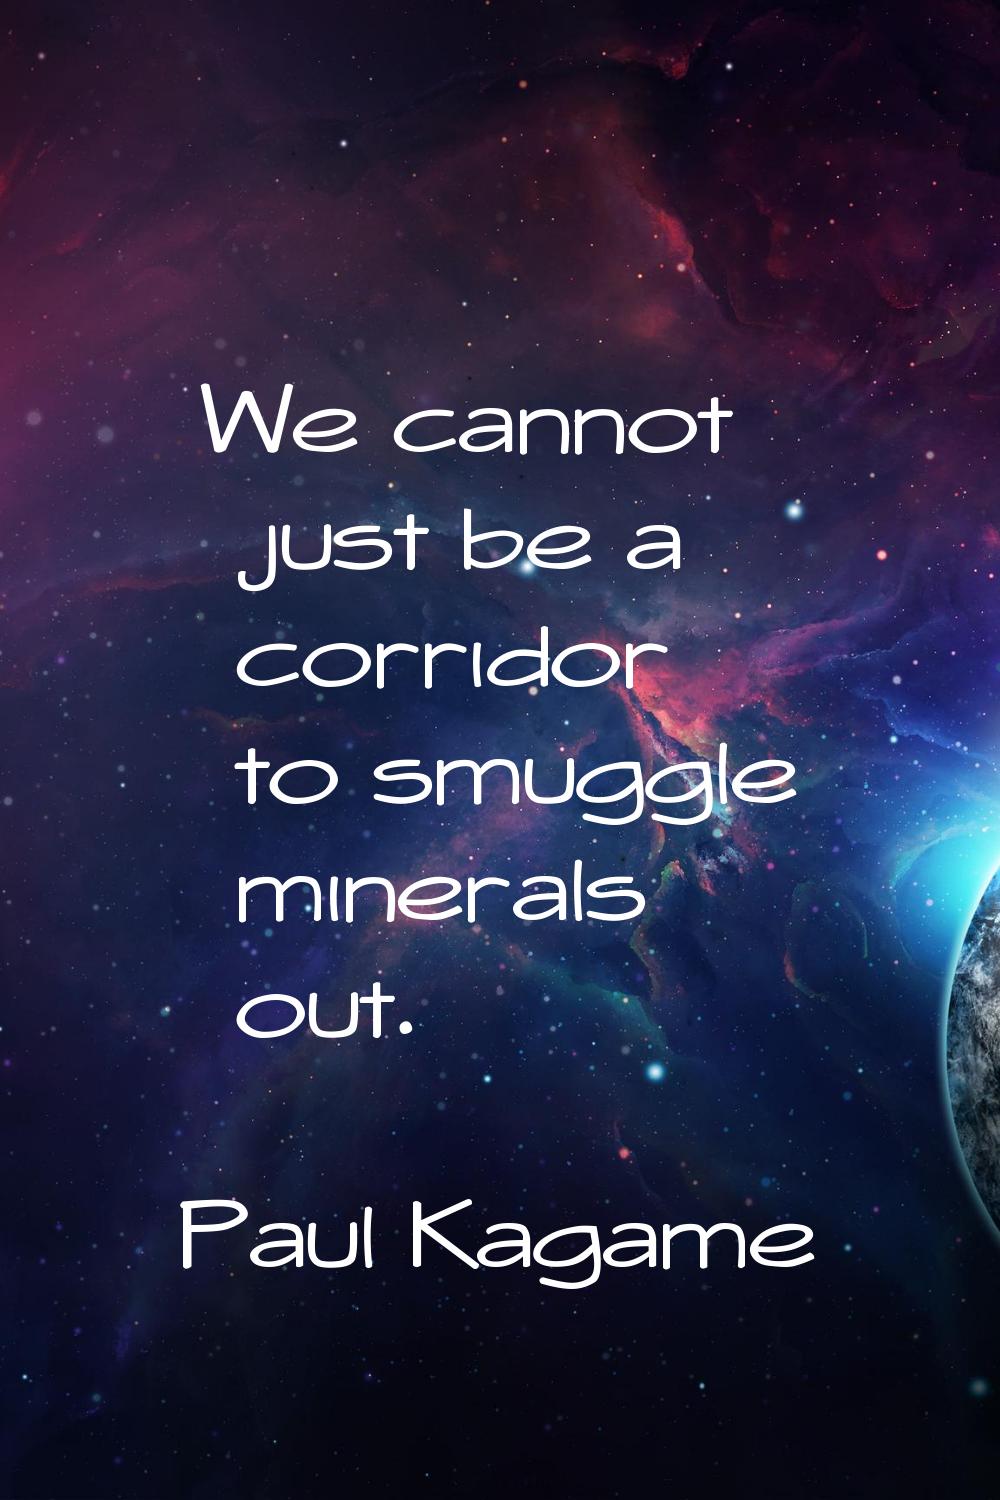 We cannot just be a corridor to smuggle minerals out.